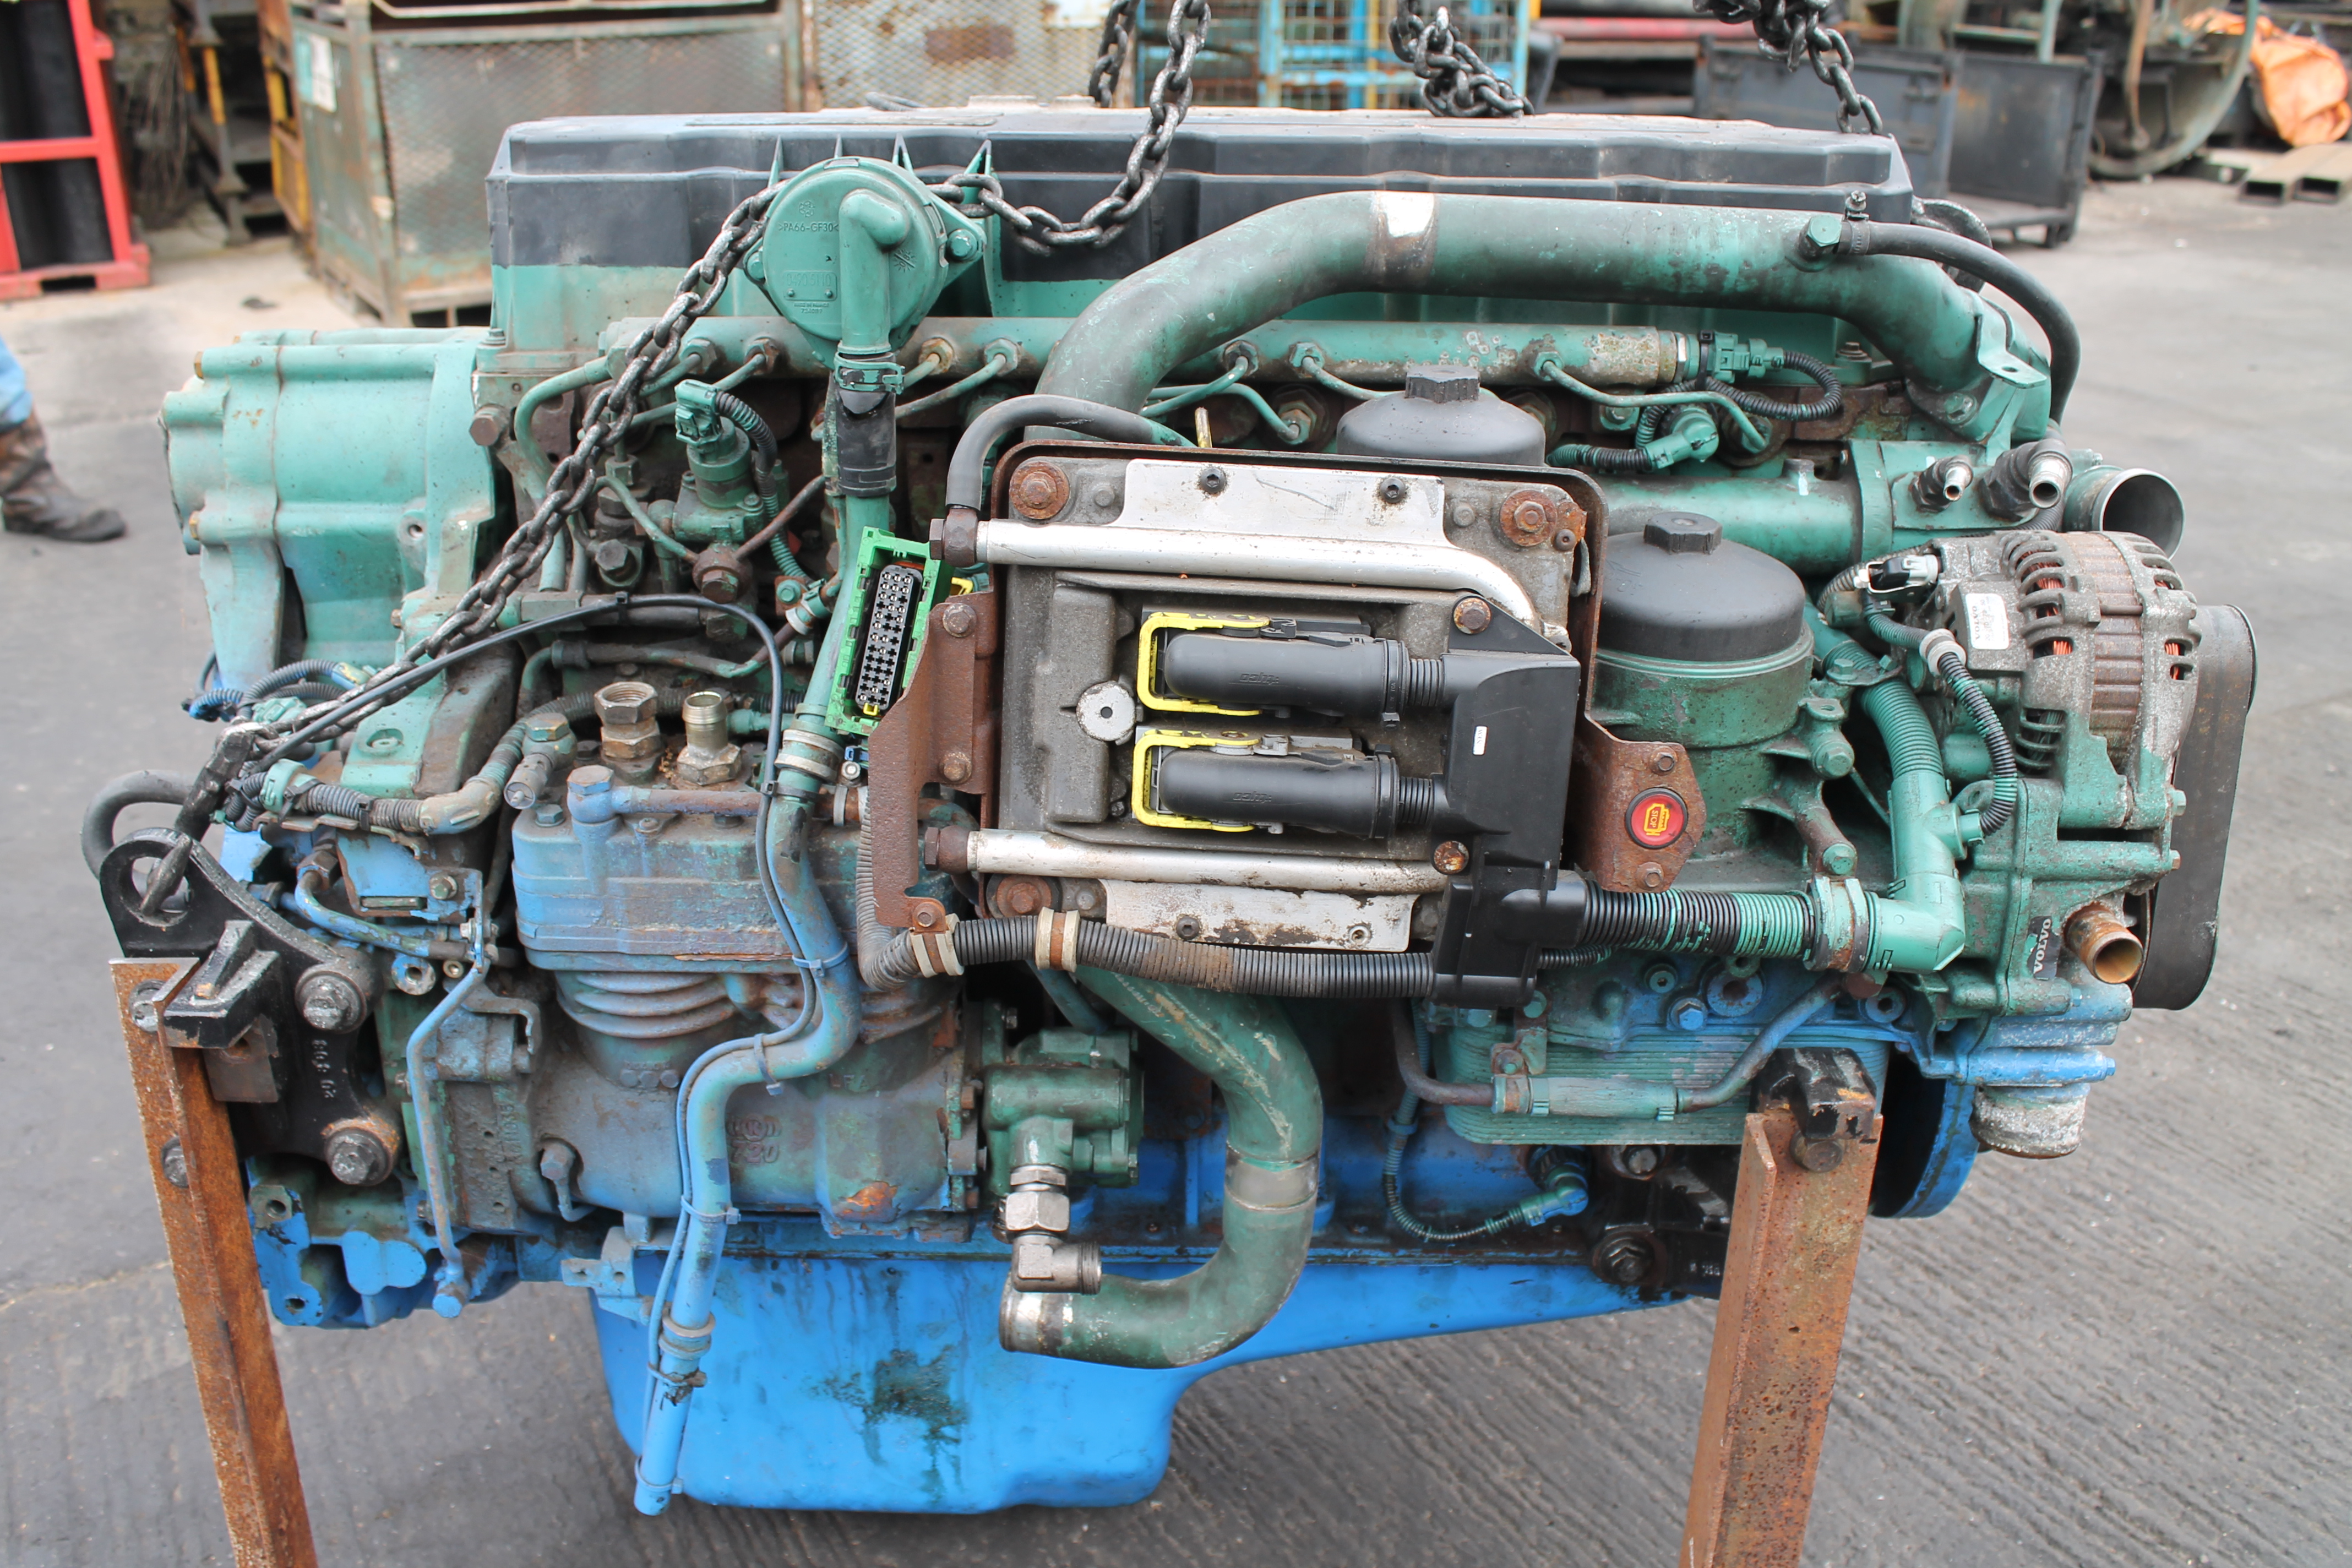 Volvo D7e Engine - Complete Used Engine For Sale - F&amp;J ...